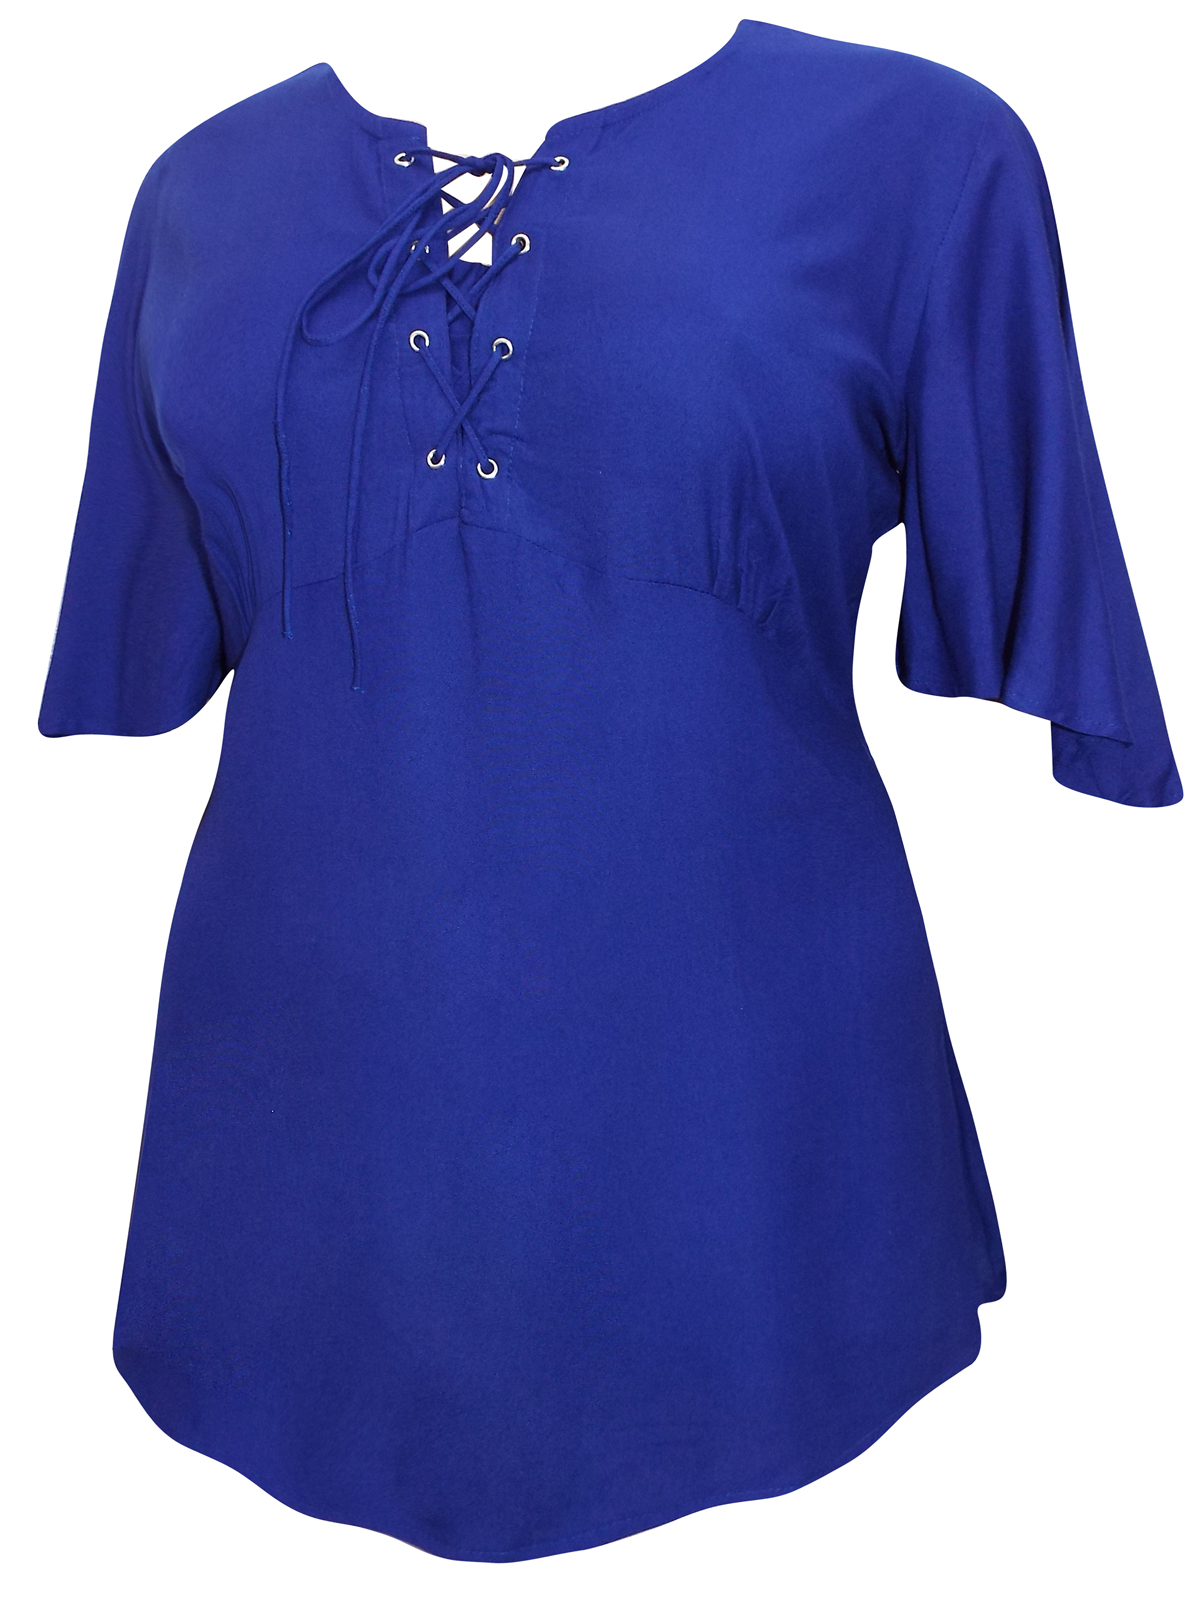 eaonplus BLUE Short Sleeve Lace Up Top - Plus Size 18/20 to 30/32